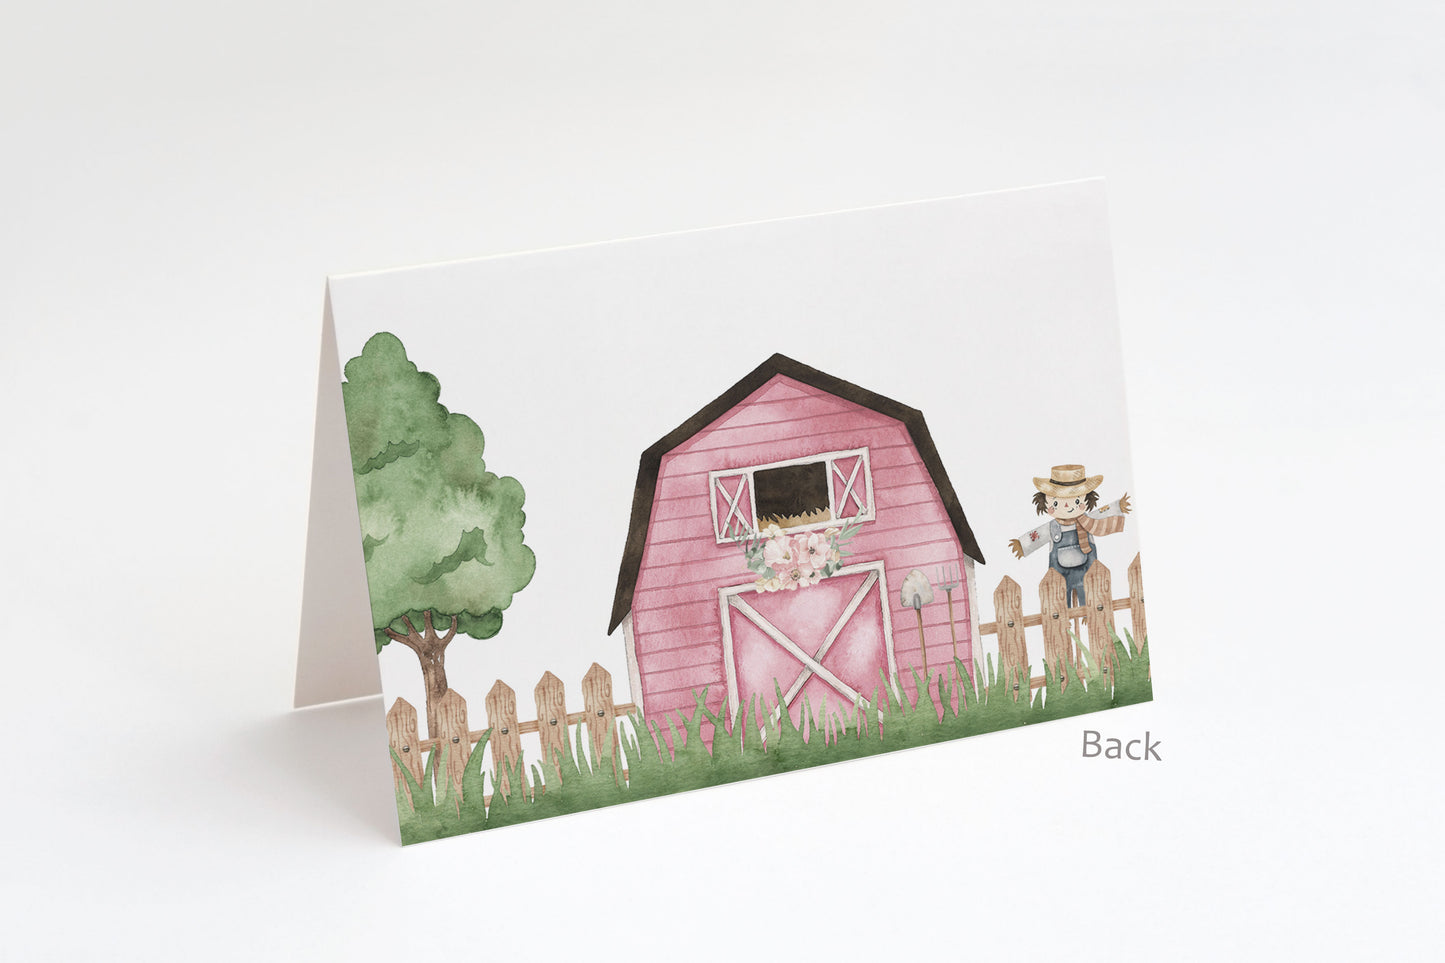 Floral Cow Place Cards | Girl Farm Table Decorations - 11A